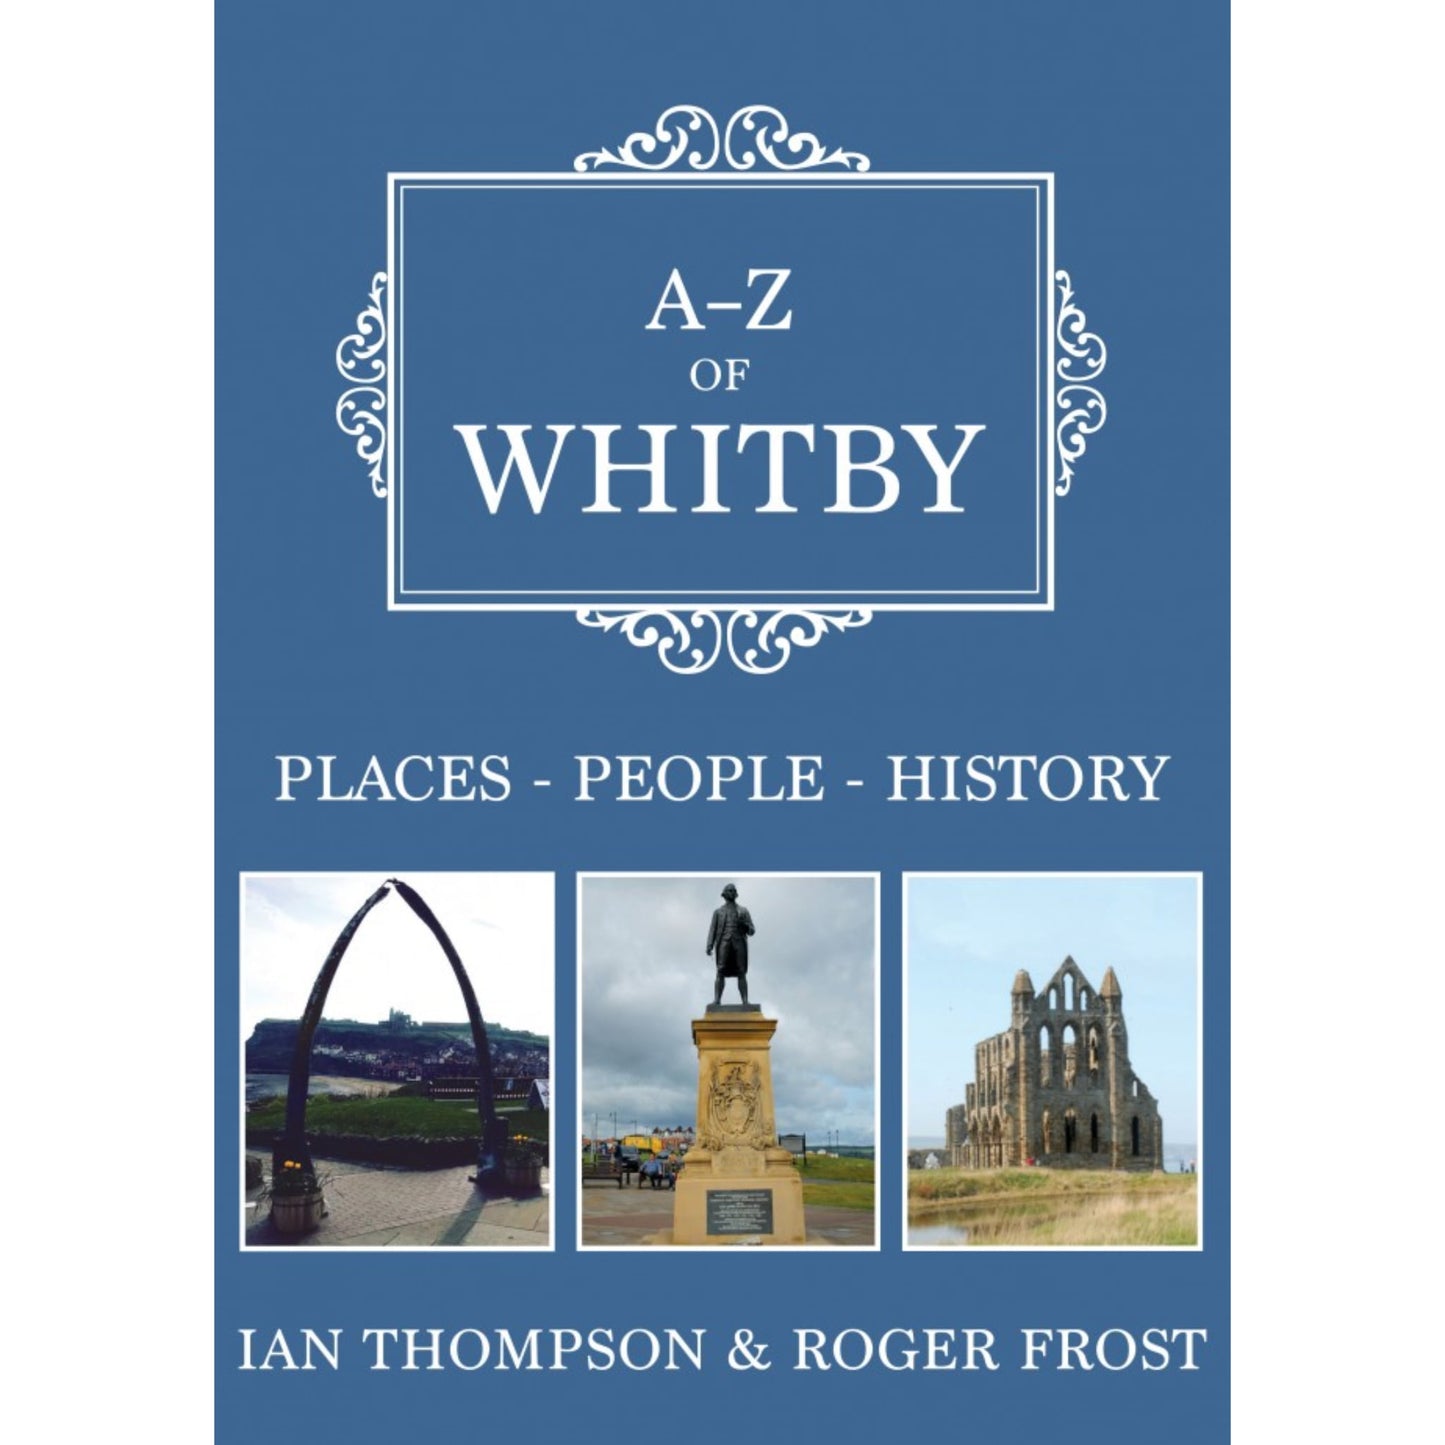 A-Z of Whitby Book - The Great Yorkshire Shop